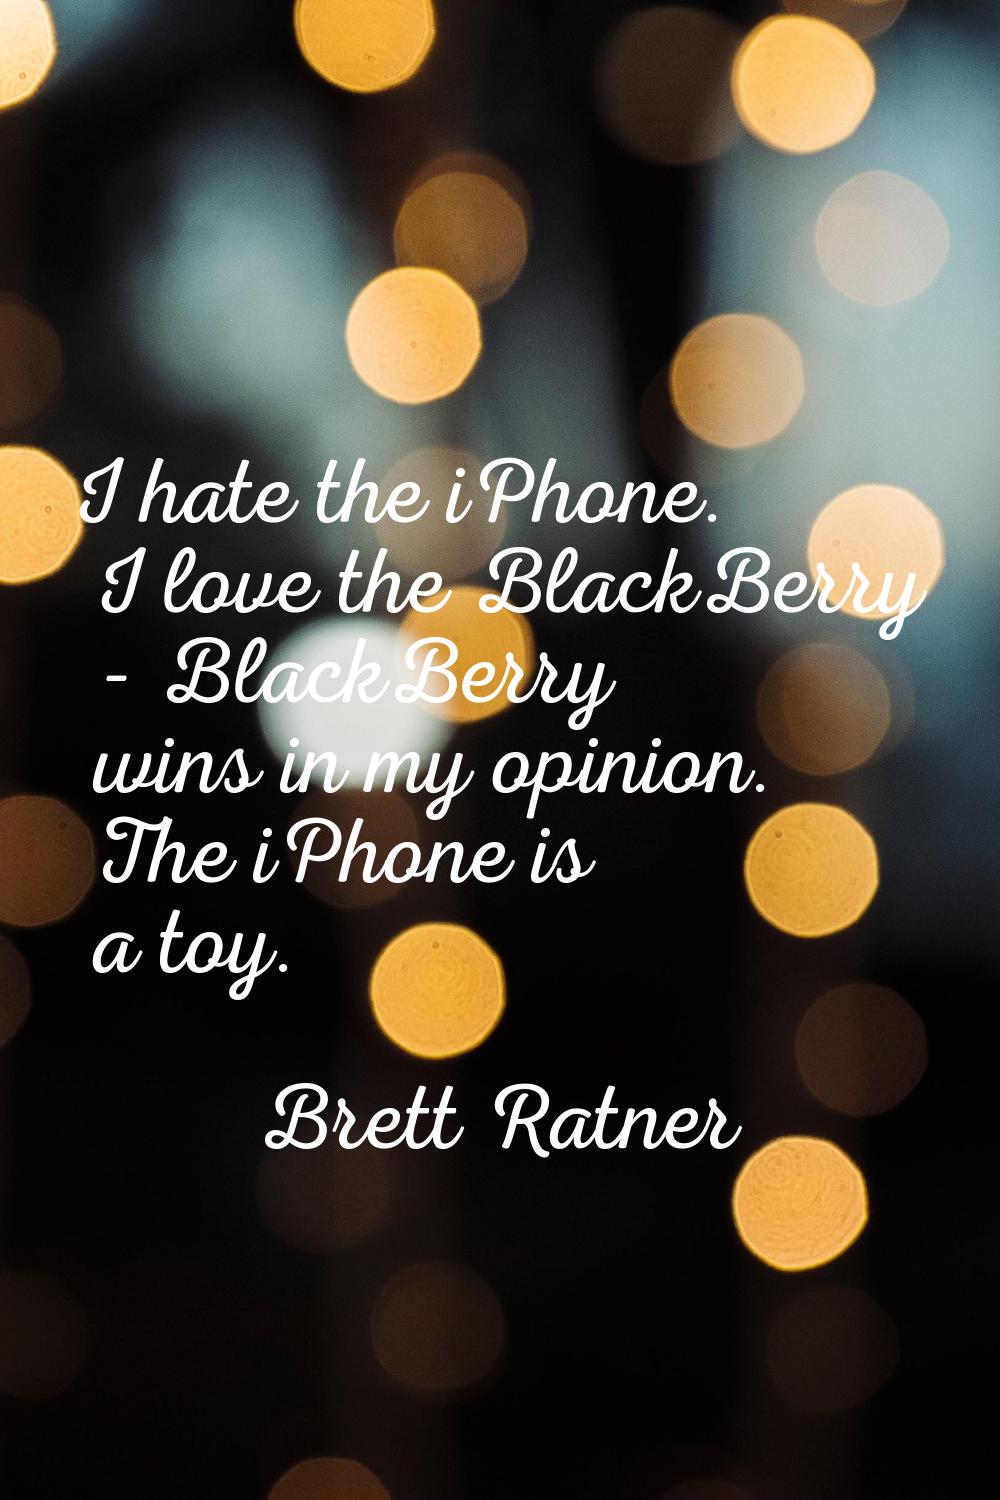 I hate the iPhone. I love the BlackBerry - BlackBerry wins in my opinion. The iPhone is a toy.